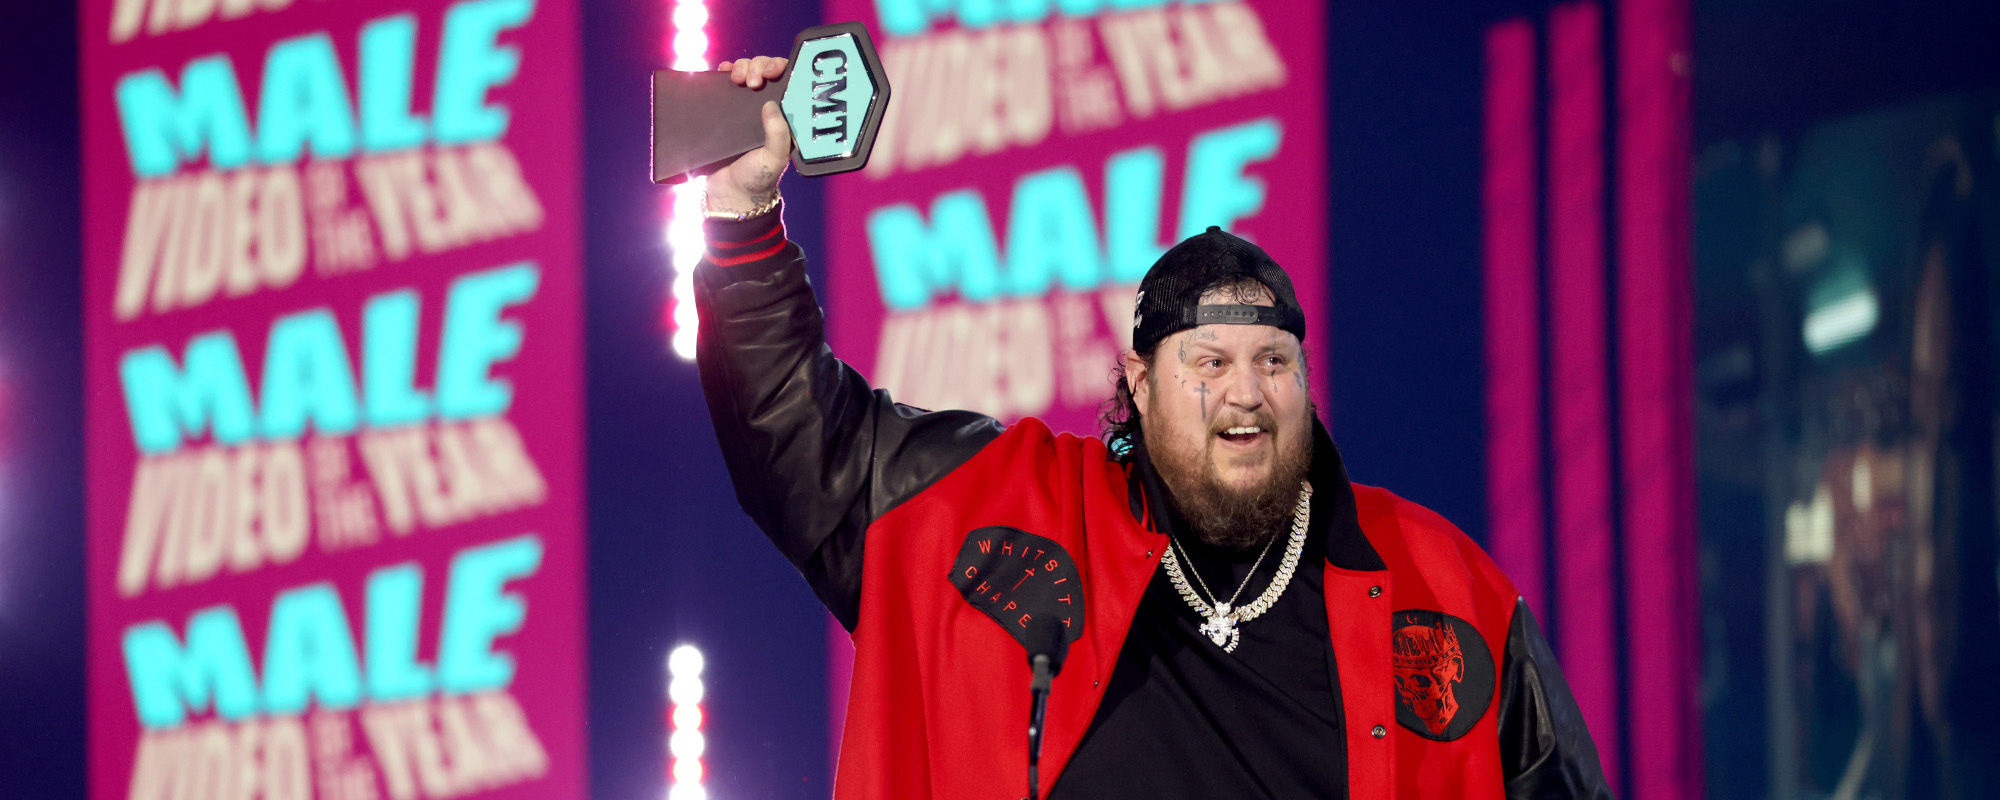 Jelly Roll Takes Home His First Three CMT Music Awards